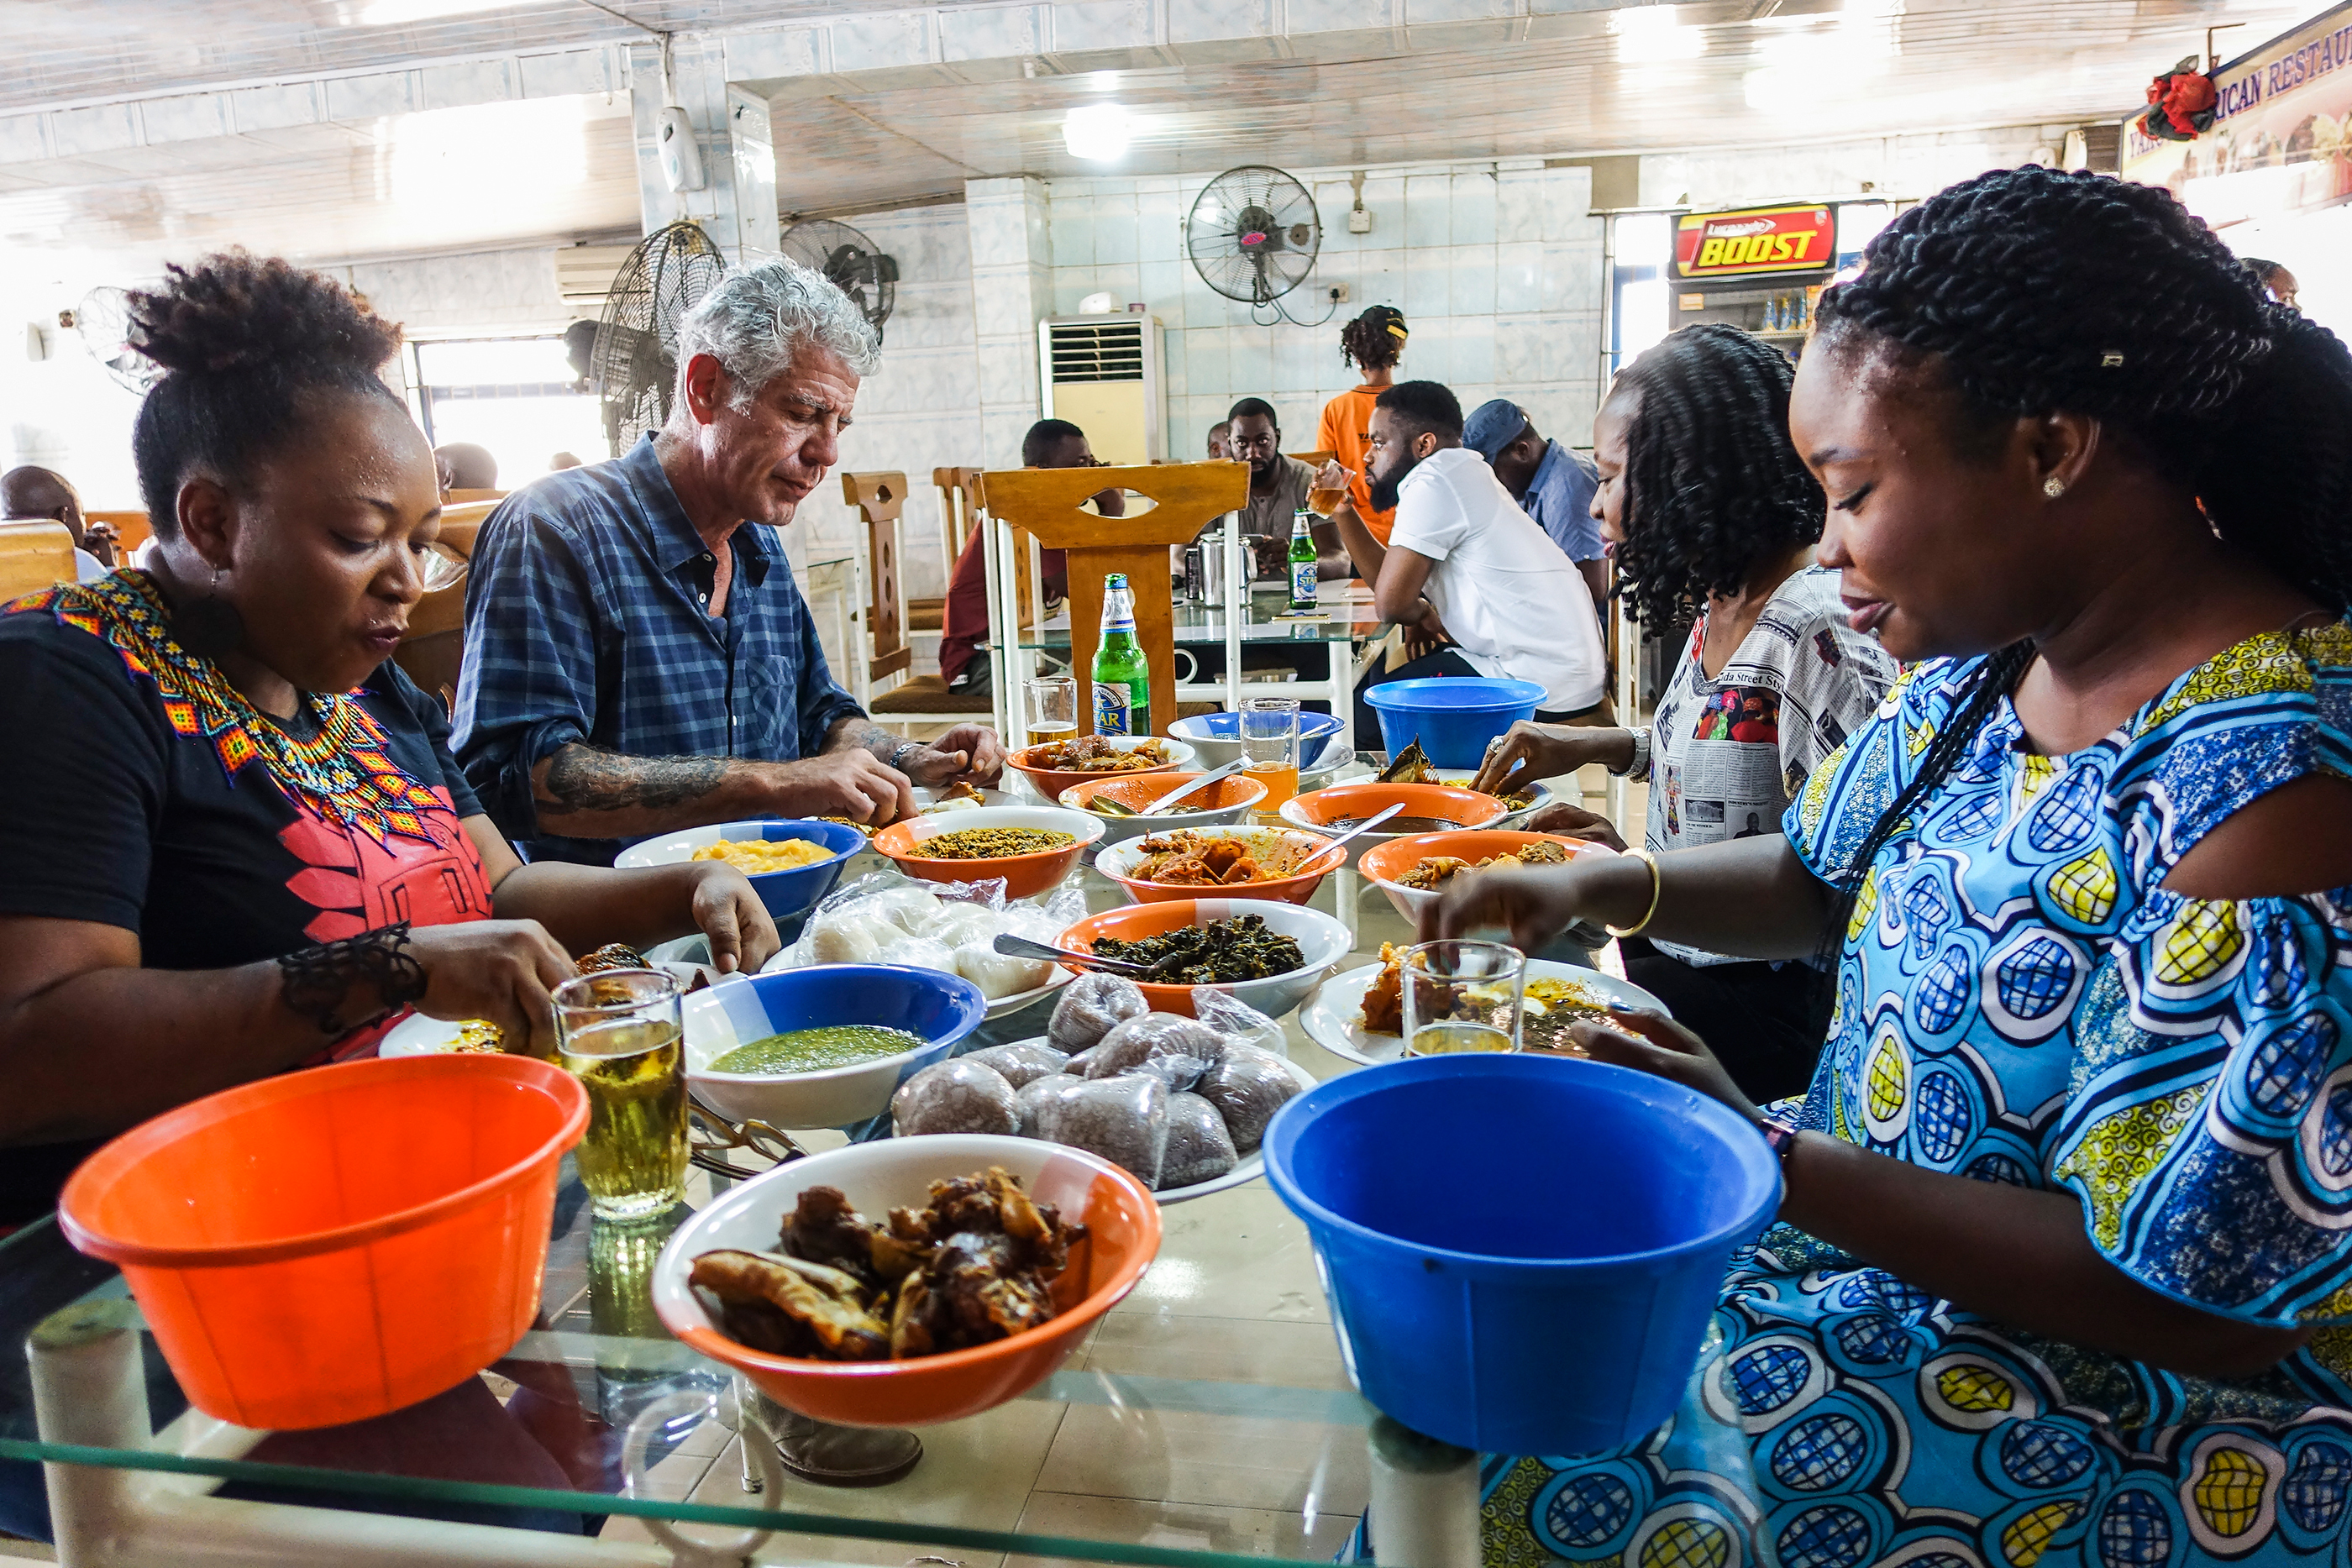 How to Find the Best Restaurant Wherever You Are, According to Anthony Bourdain